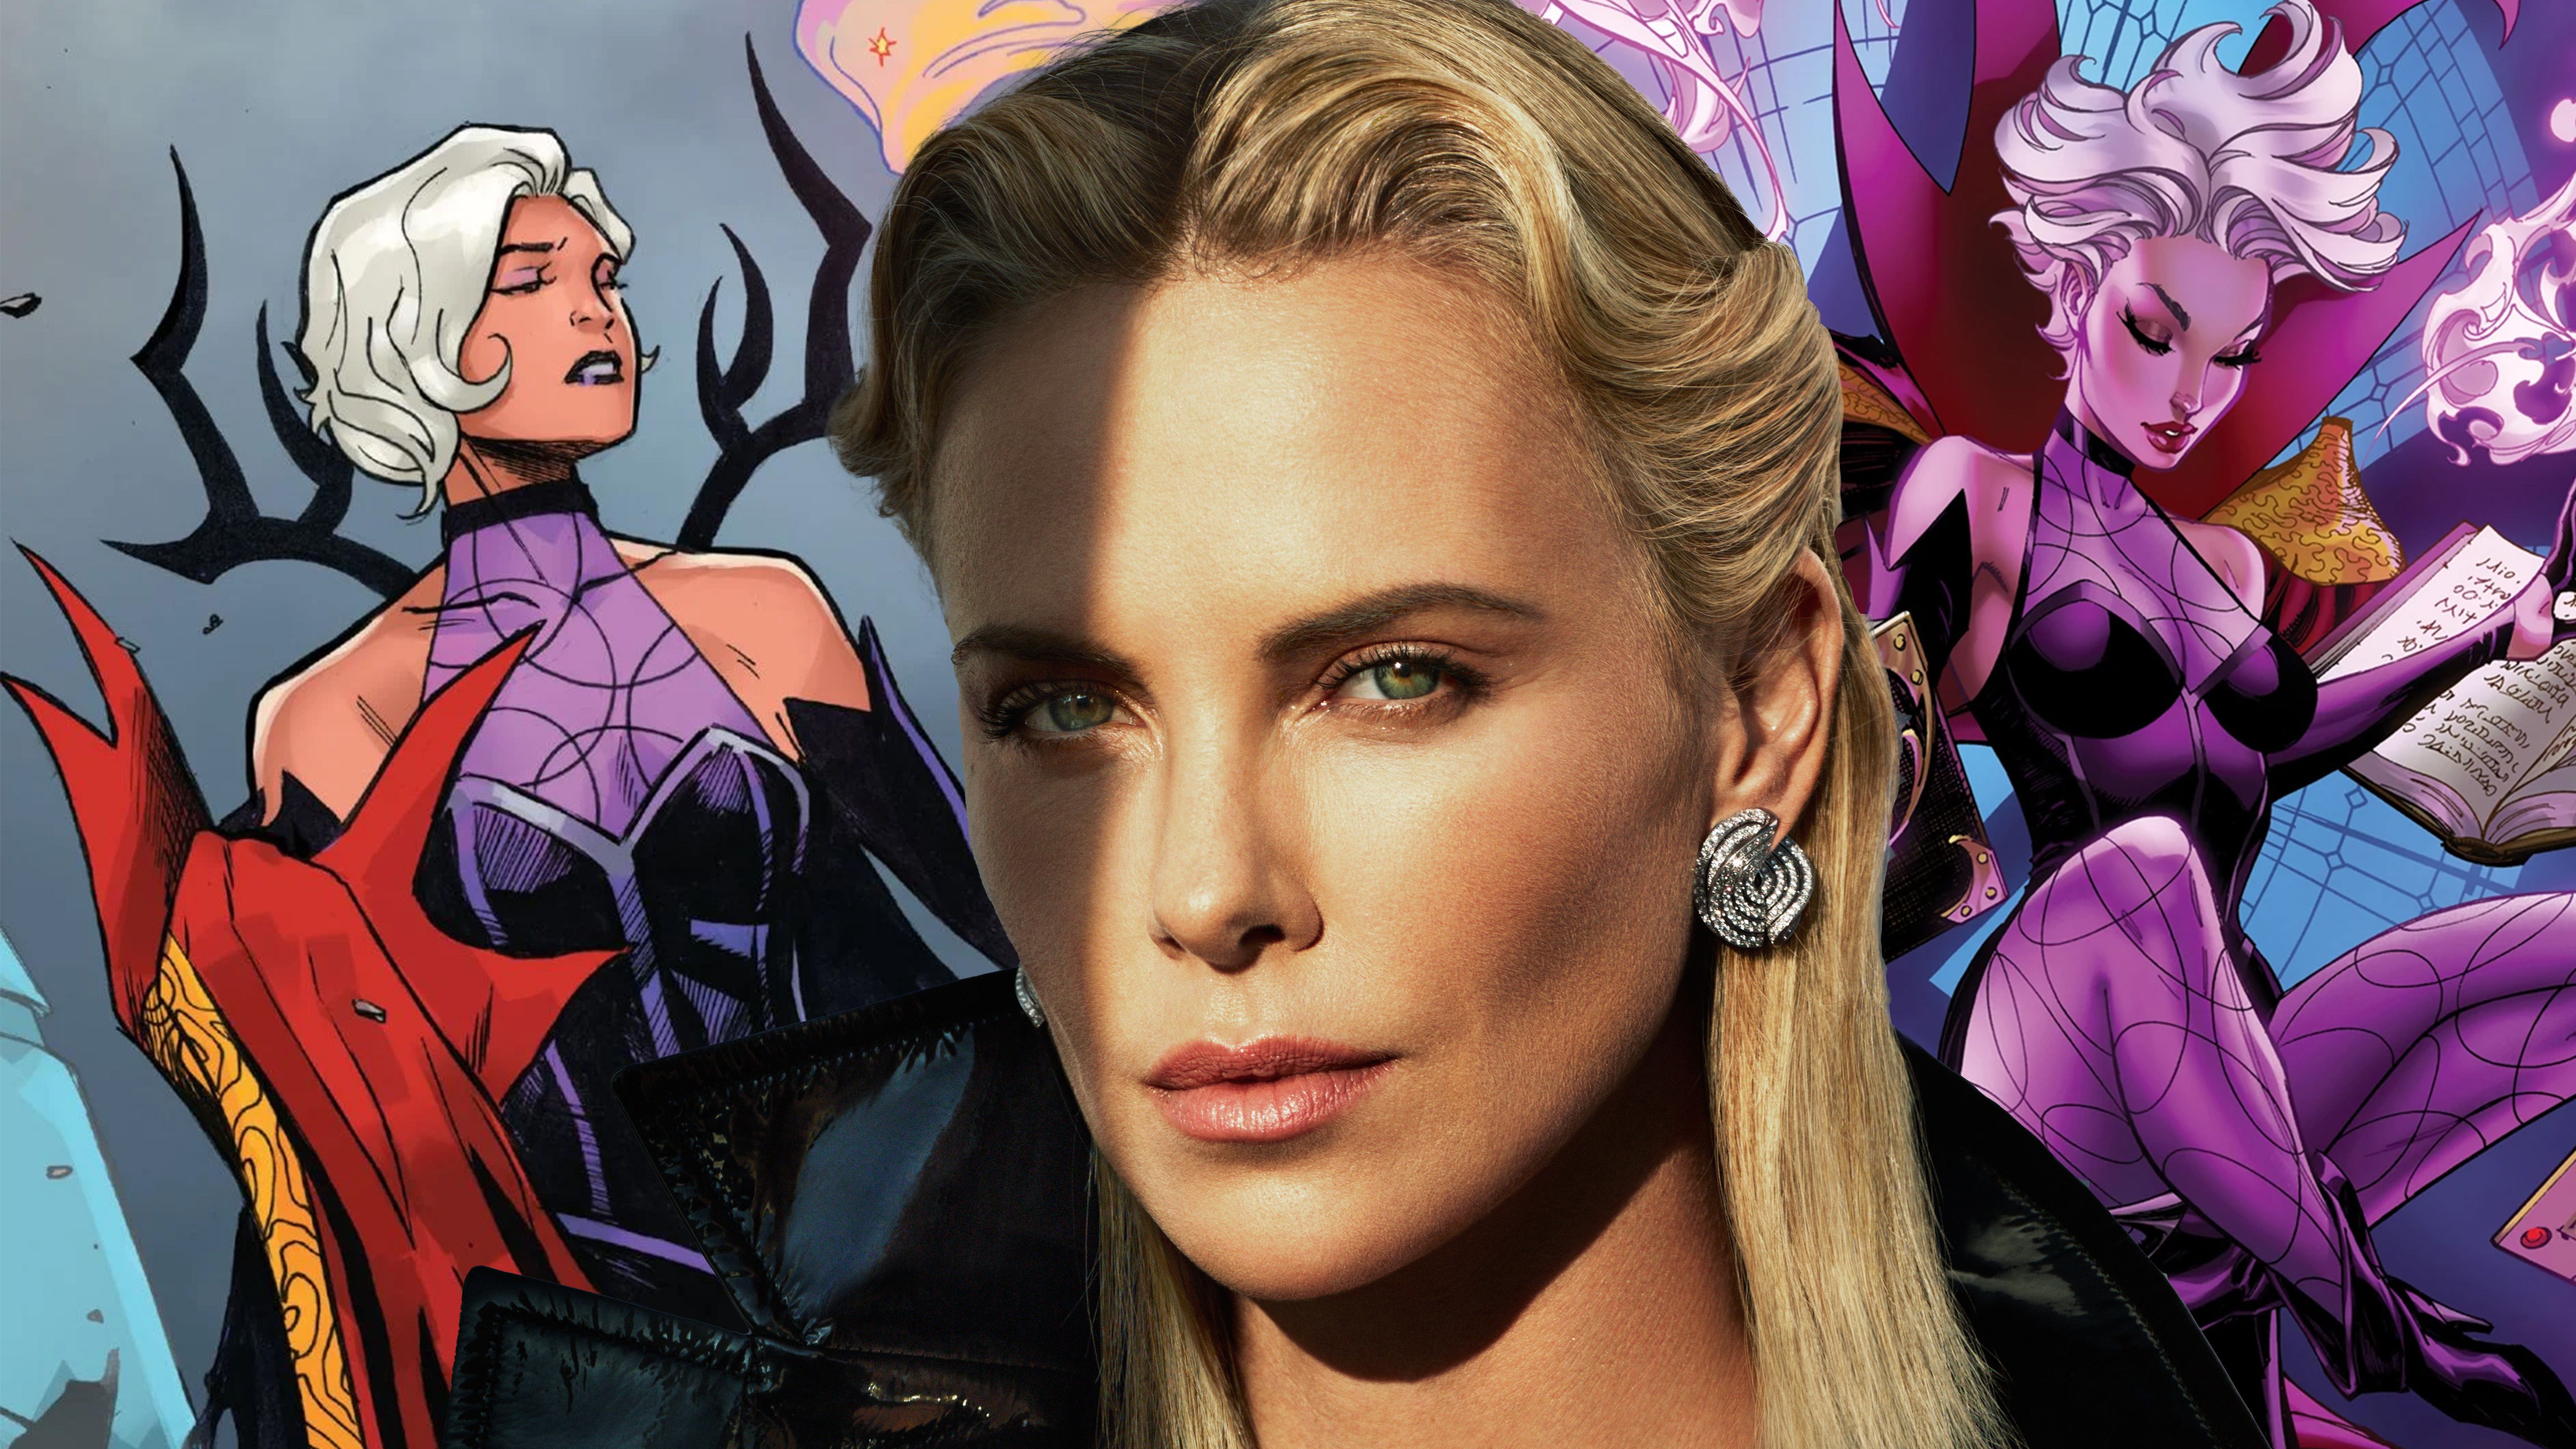 Actress Charlize Theron in the line of comedy covers for Clea.